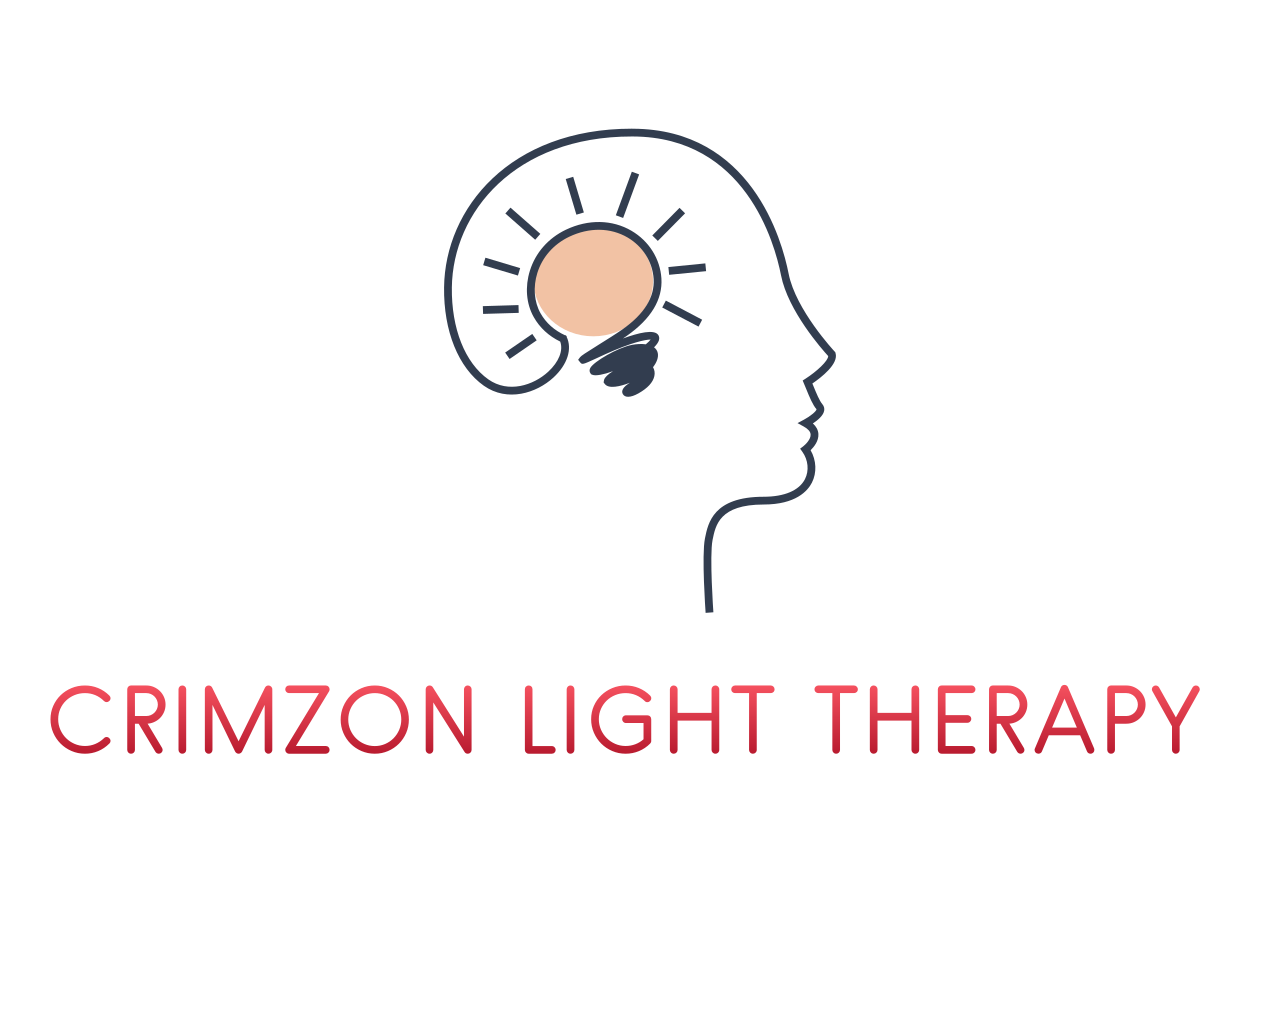 CRIMZON LIGHT THERAPY's web page